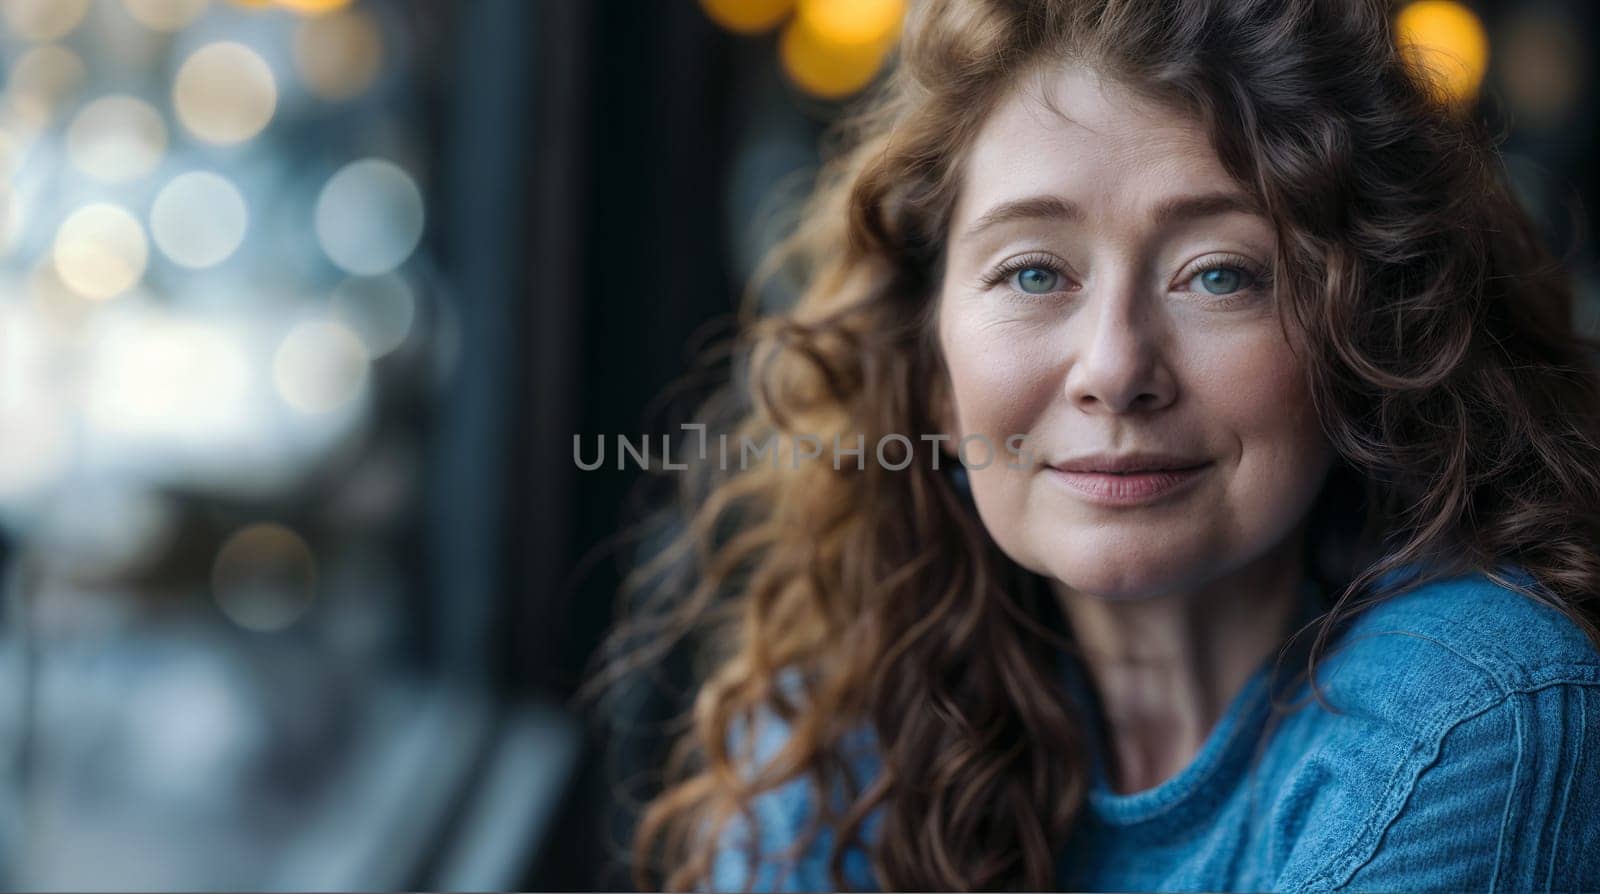 Calm, curly-haired smiling woman in urban setting with soft bokeh lights by chrisroll